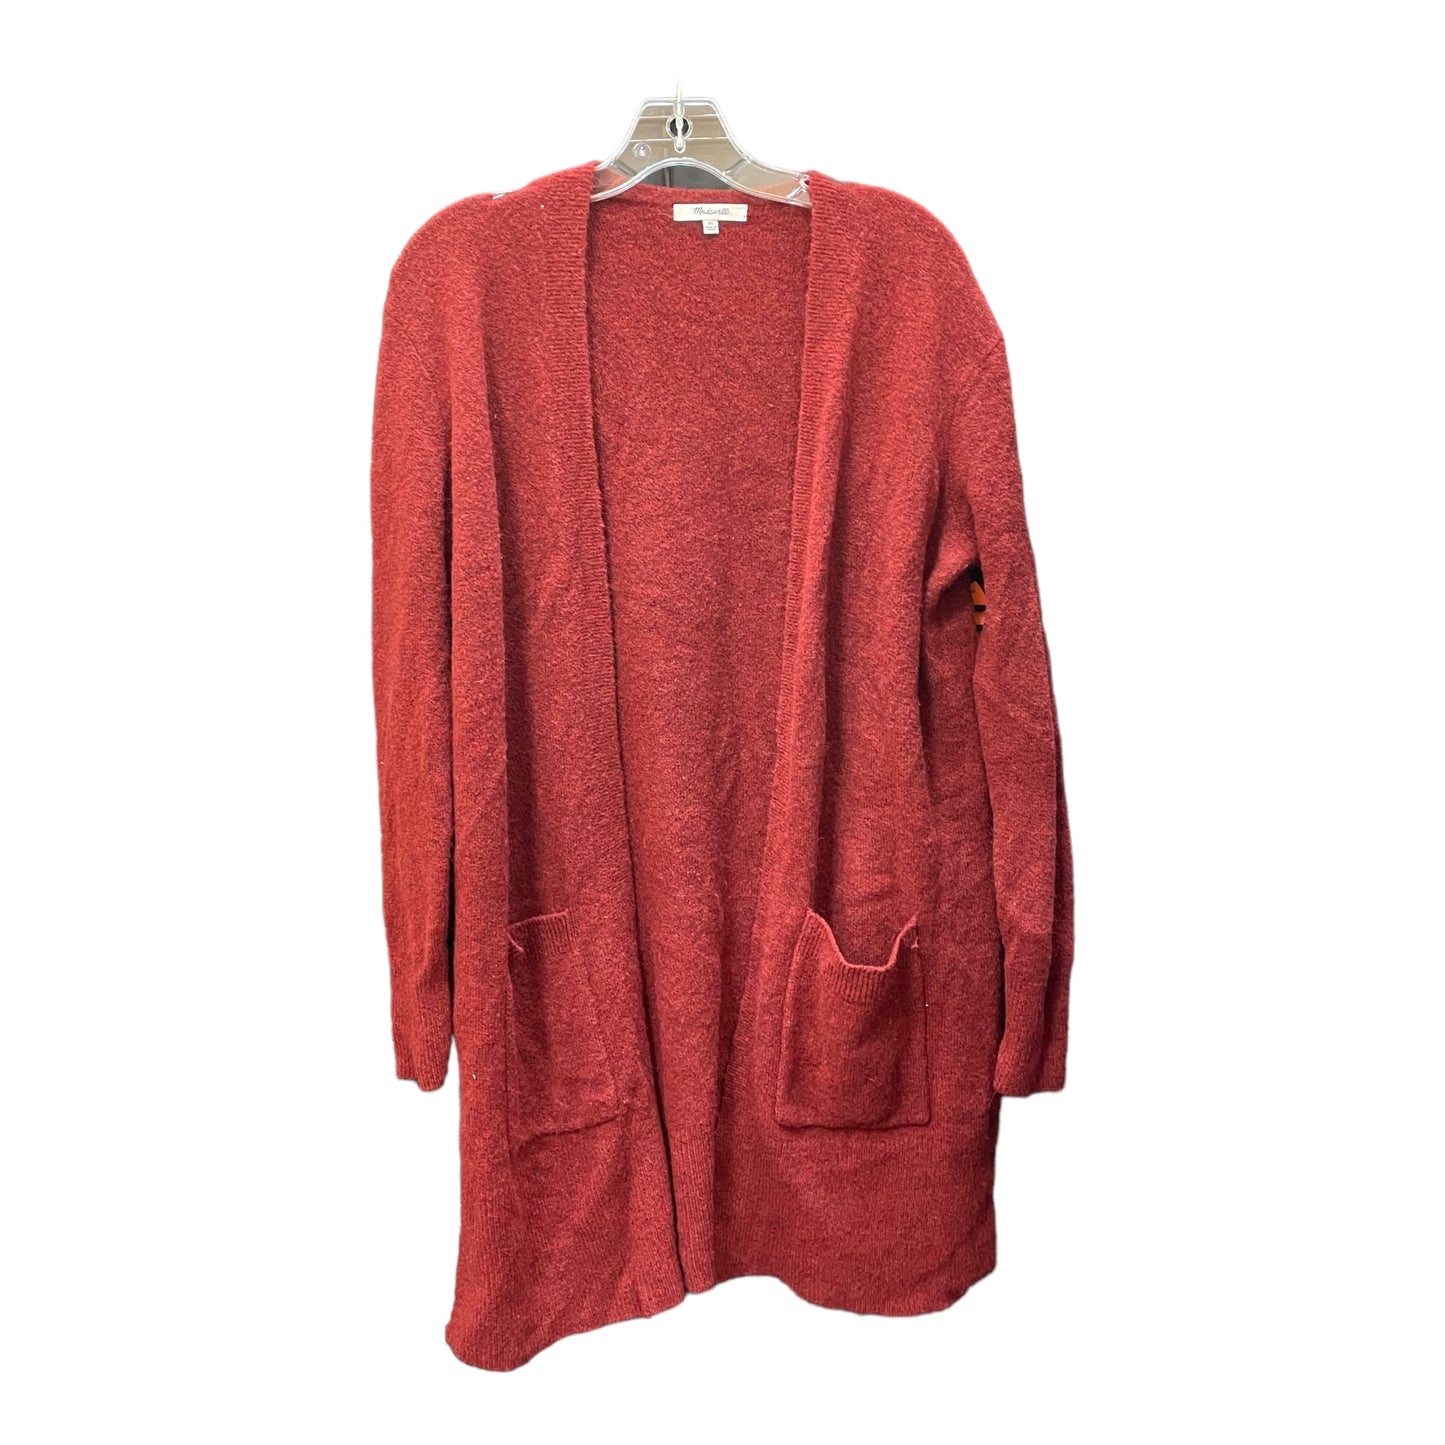 Cardigan By Madewell  Size: Xs